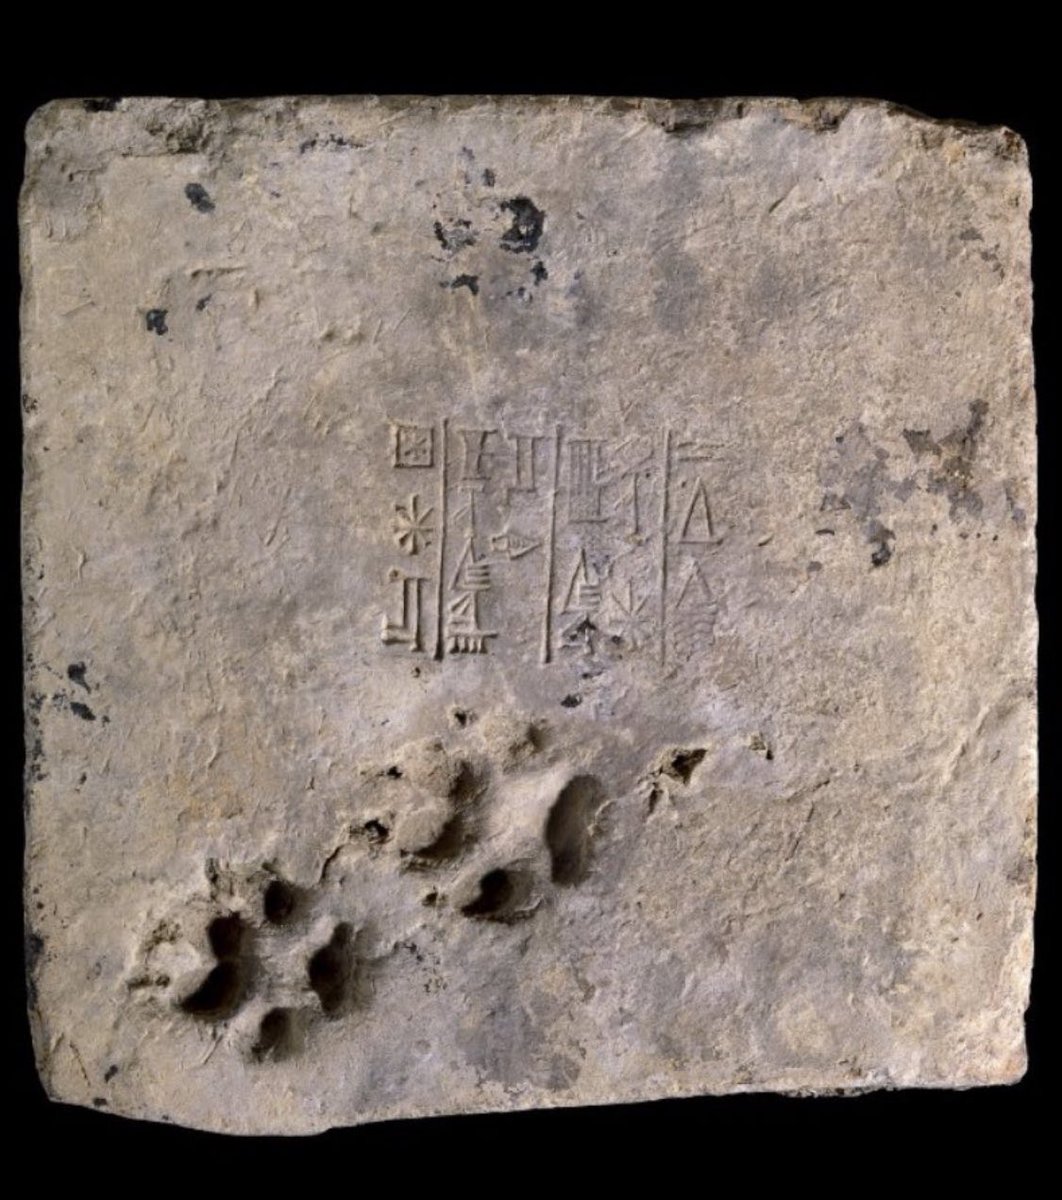 This is a 4,000-year-old mud brick from the ziggurat in the ancient city of Ur in Iraq, stamped with a cuneiform inscription that mentions king Ur-Nammu.The brick also immortalises the paw prints of a very good doggo who walked over it before it dried.